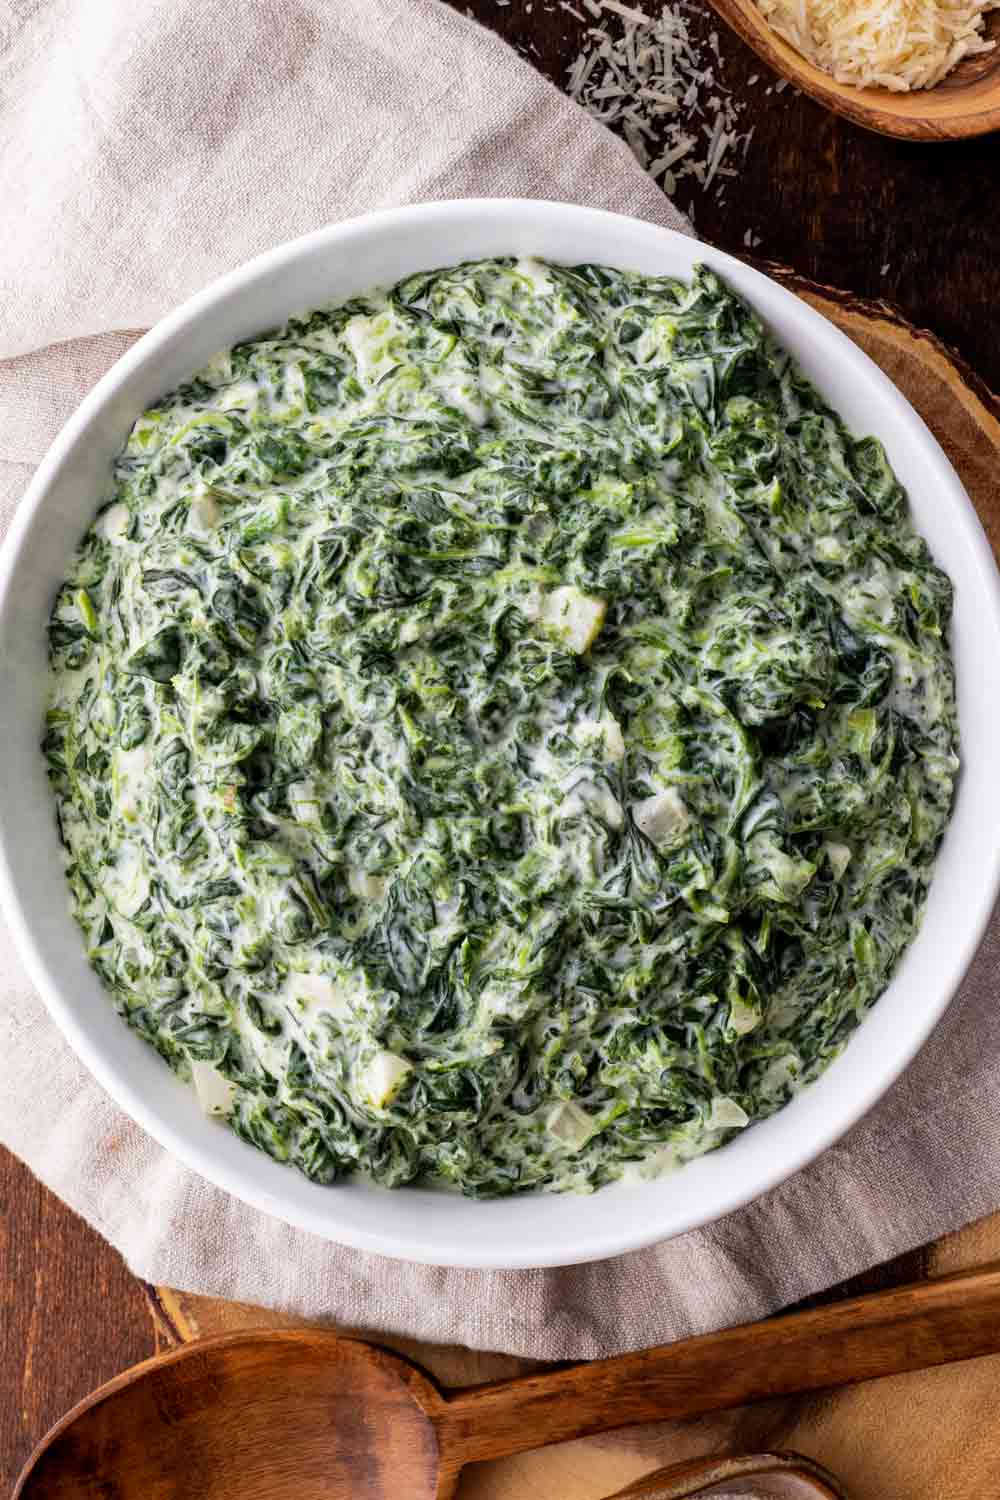 Cream Spinach with Water Chesynuts